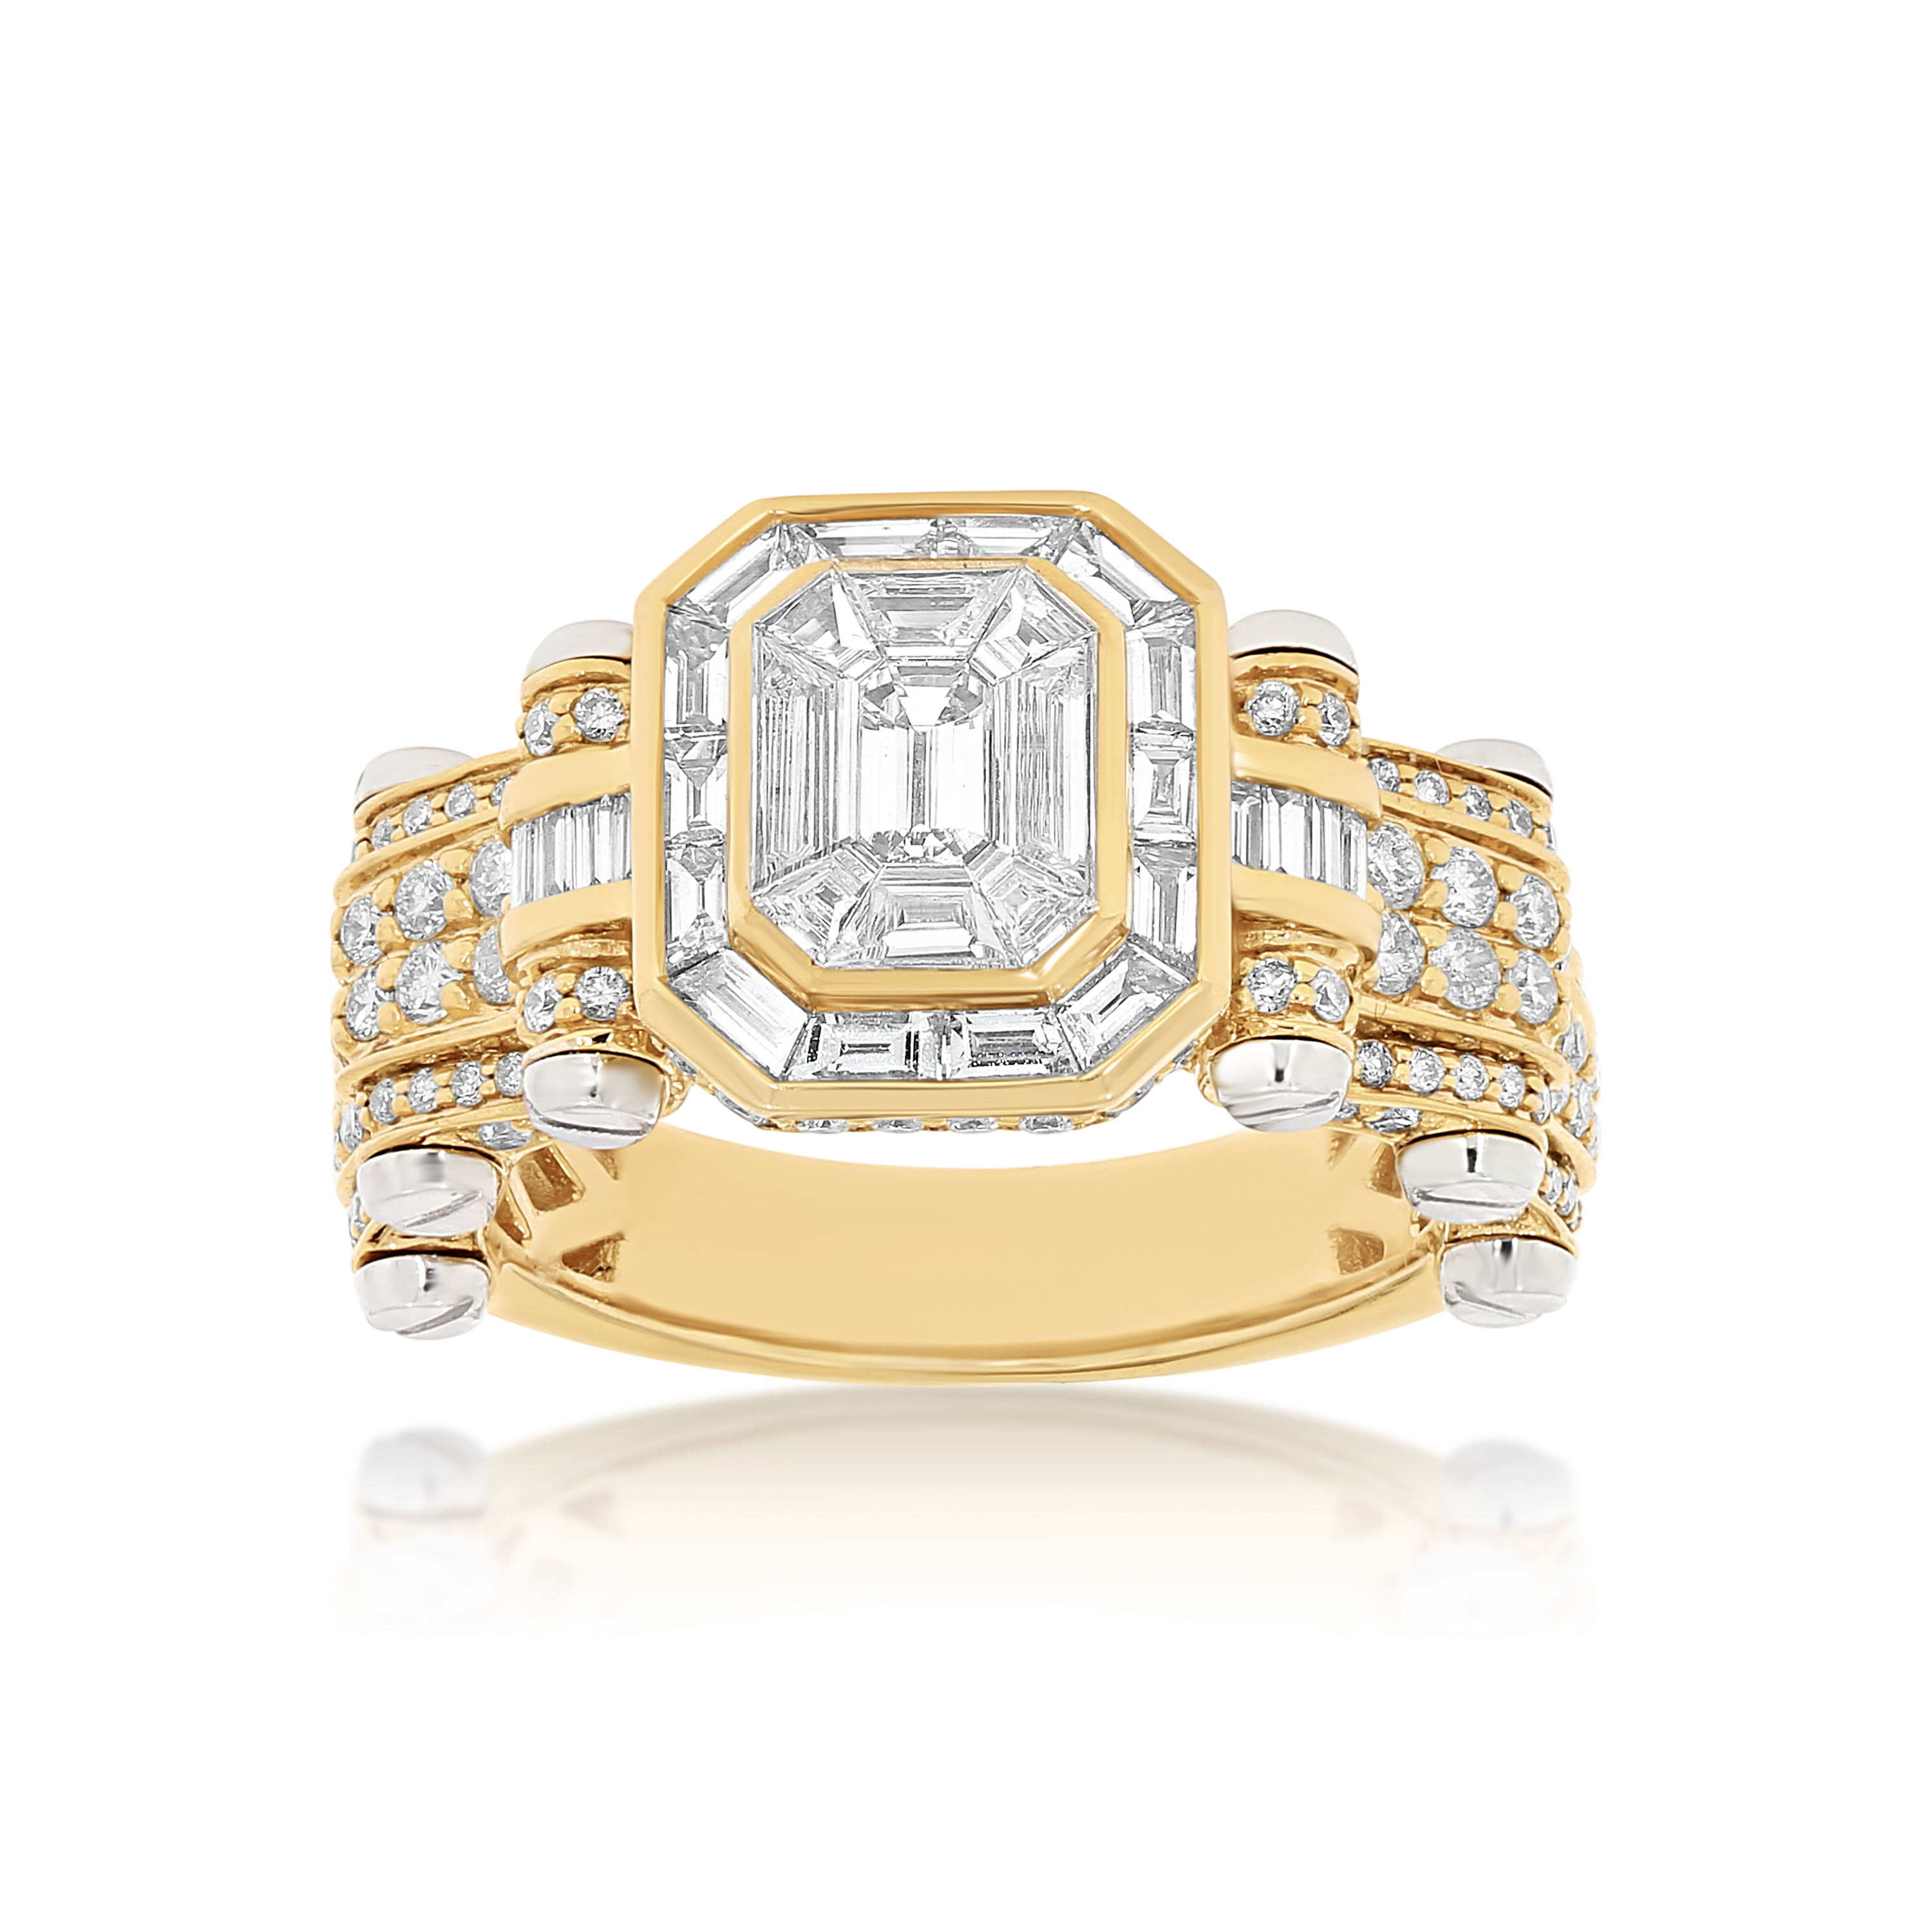 Emerald Cut Diamond Ring 2.85 ct. 14k Gold With White Accents